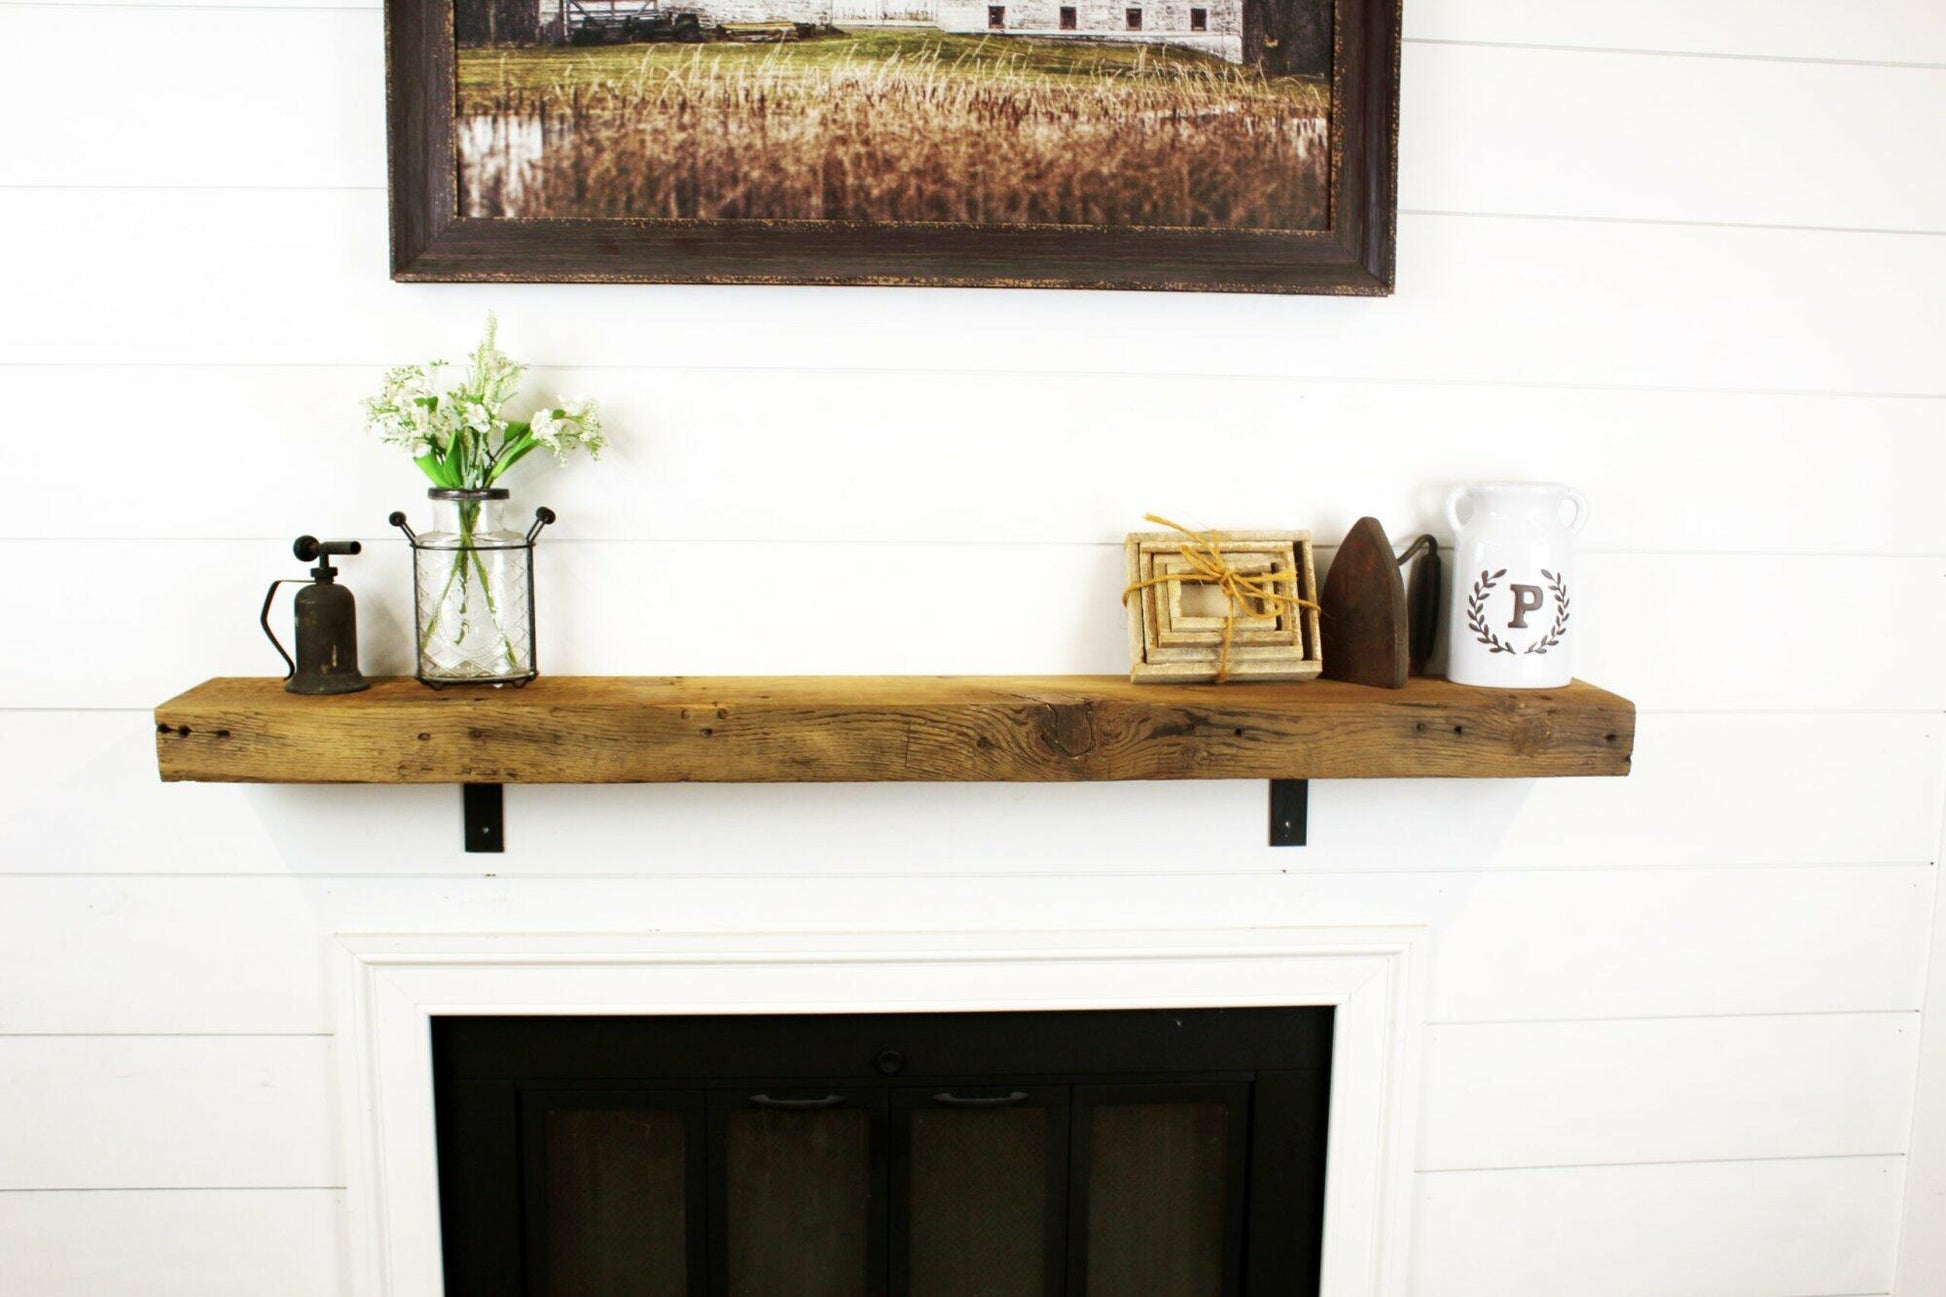 skip-planed reclaimed barnwood fireplace mantel shown in the natural option. Grain patterns, knots, and nail holes are present in the face of the mantel.